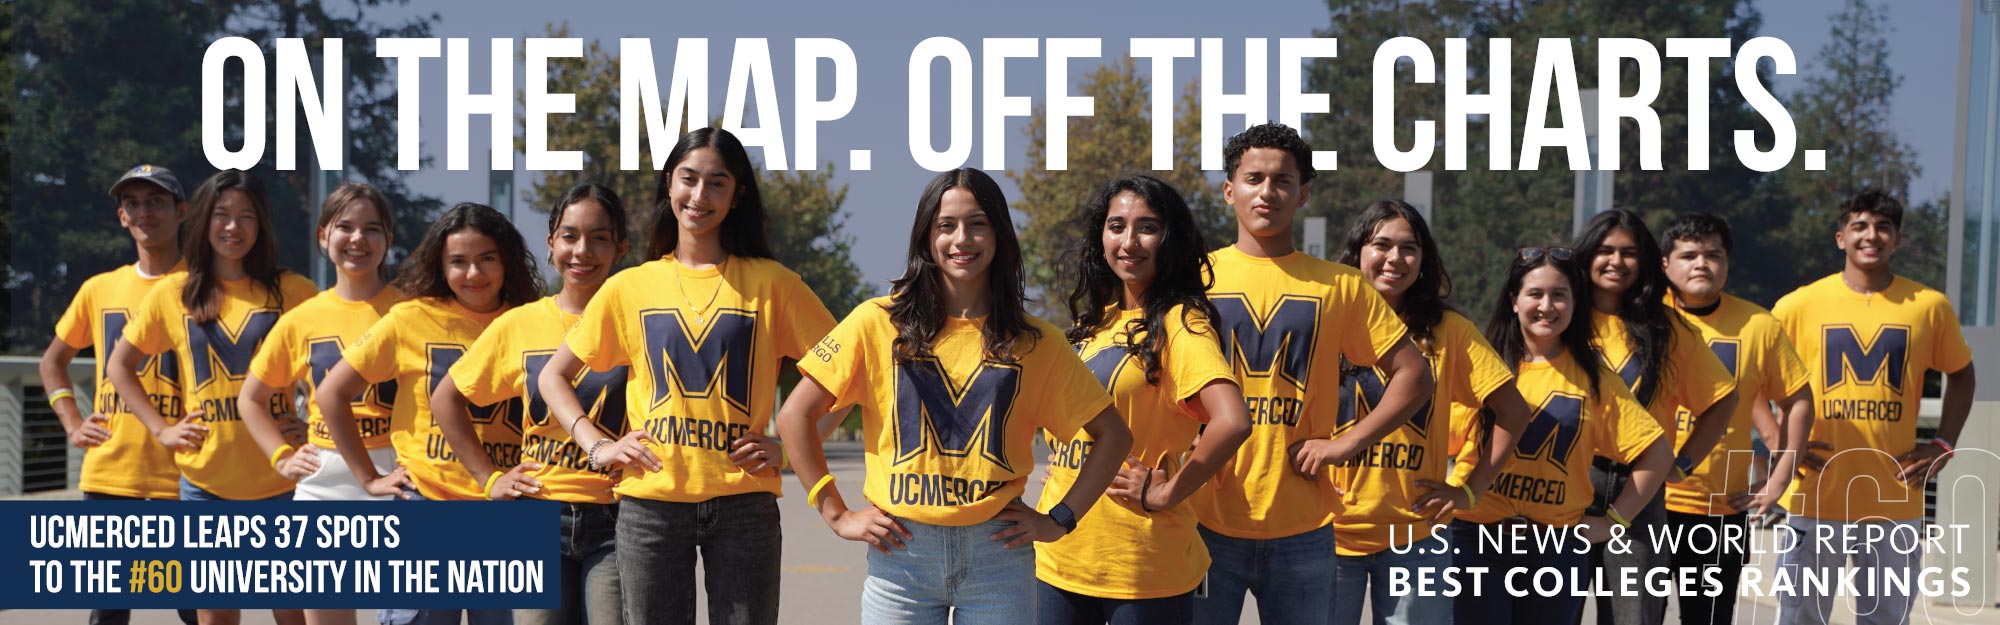 uc merced ranks top 30 in the nation